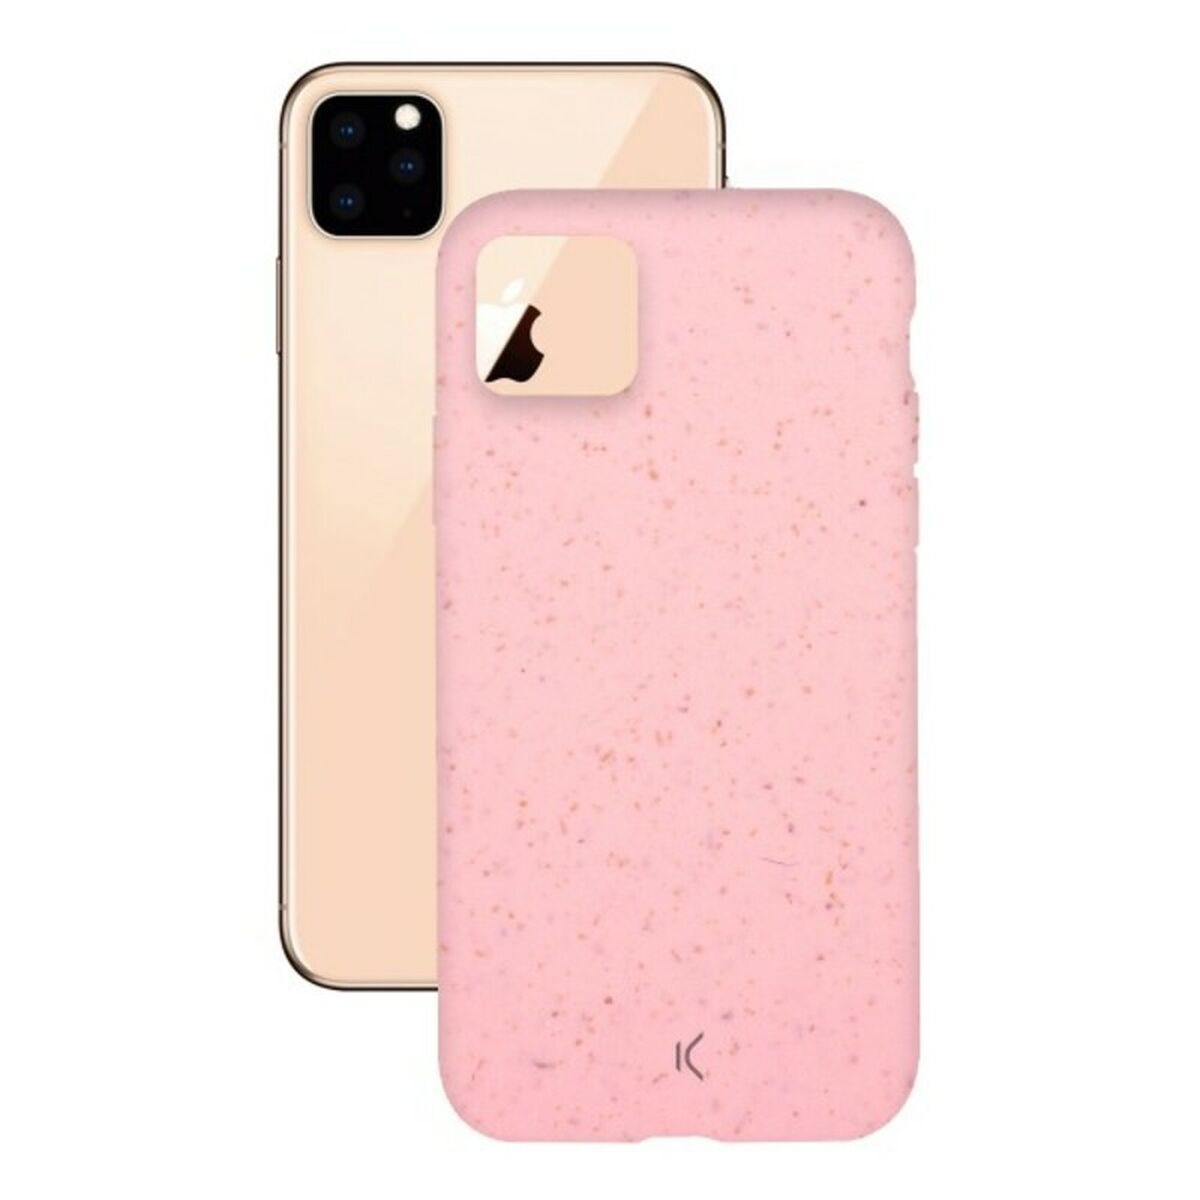 Mobile cover iPhone 11 Pro Max KSIX Eco-Friendly iPhone 11 Pro Max